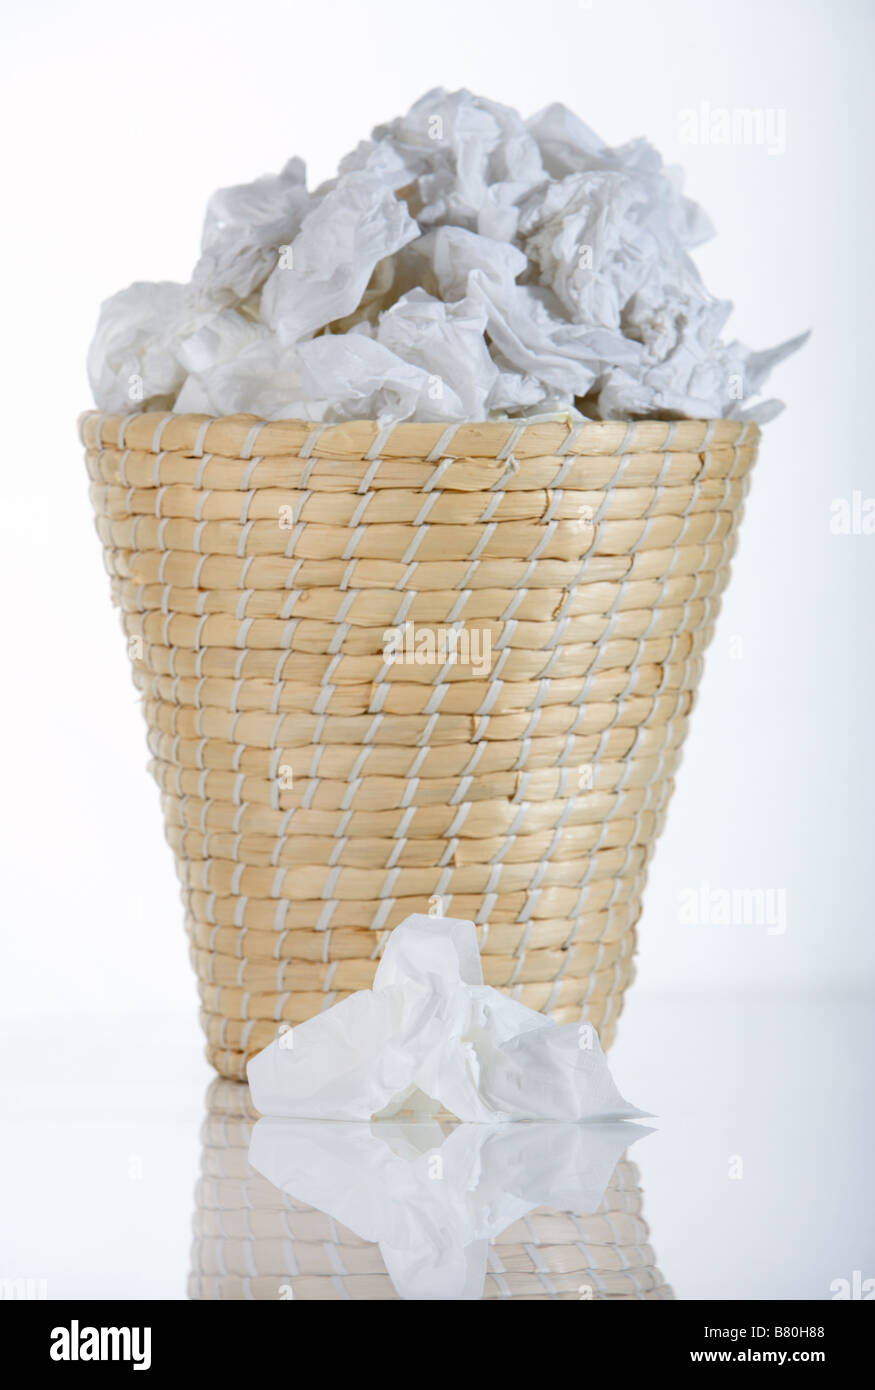 wicker waste paper basket bin full of used tissues with single used tissue lying in front of bin Stock Photo